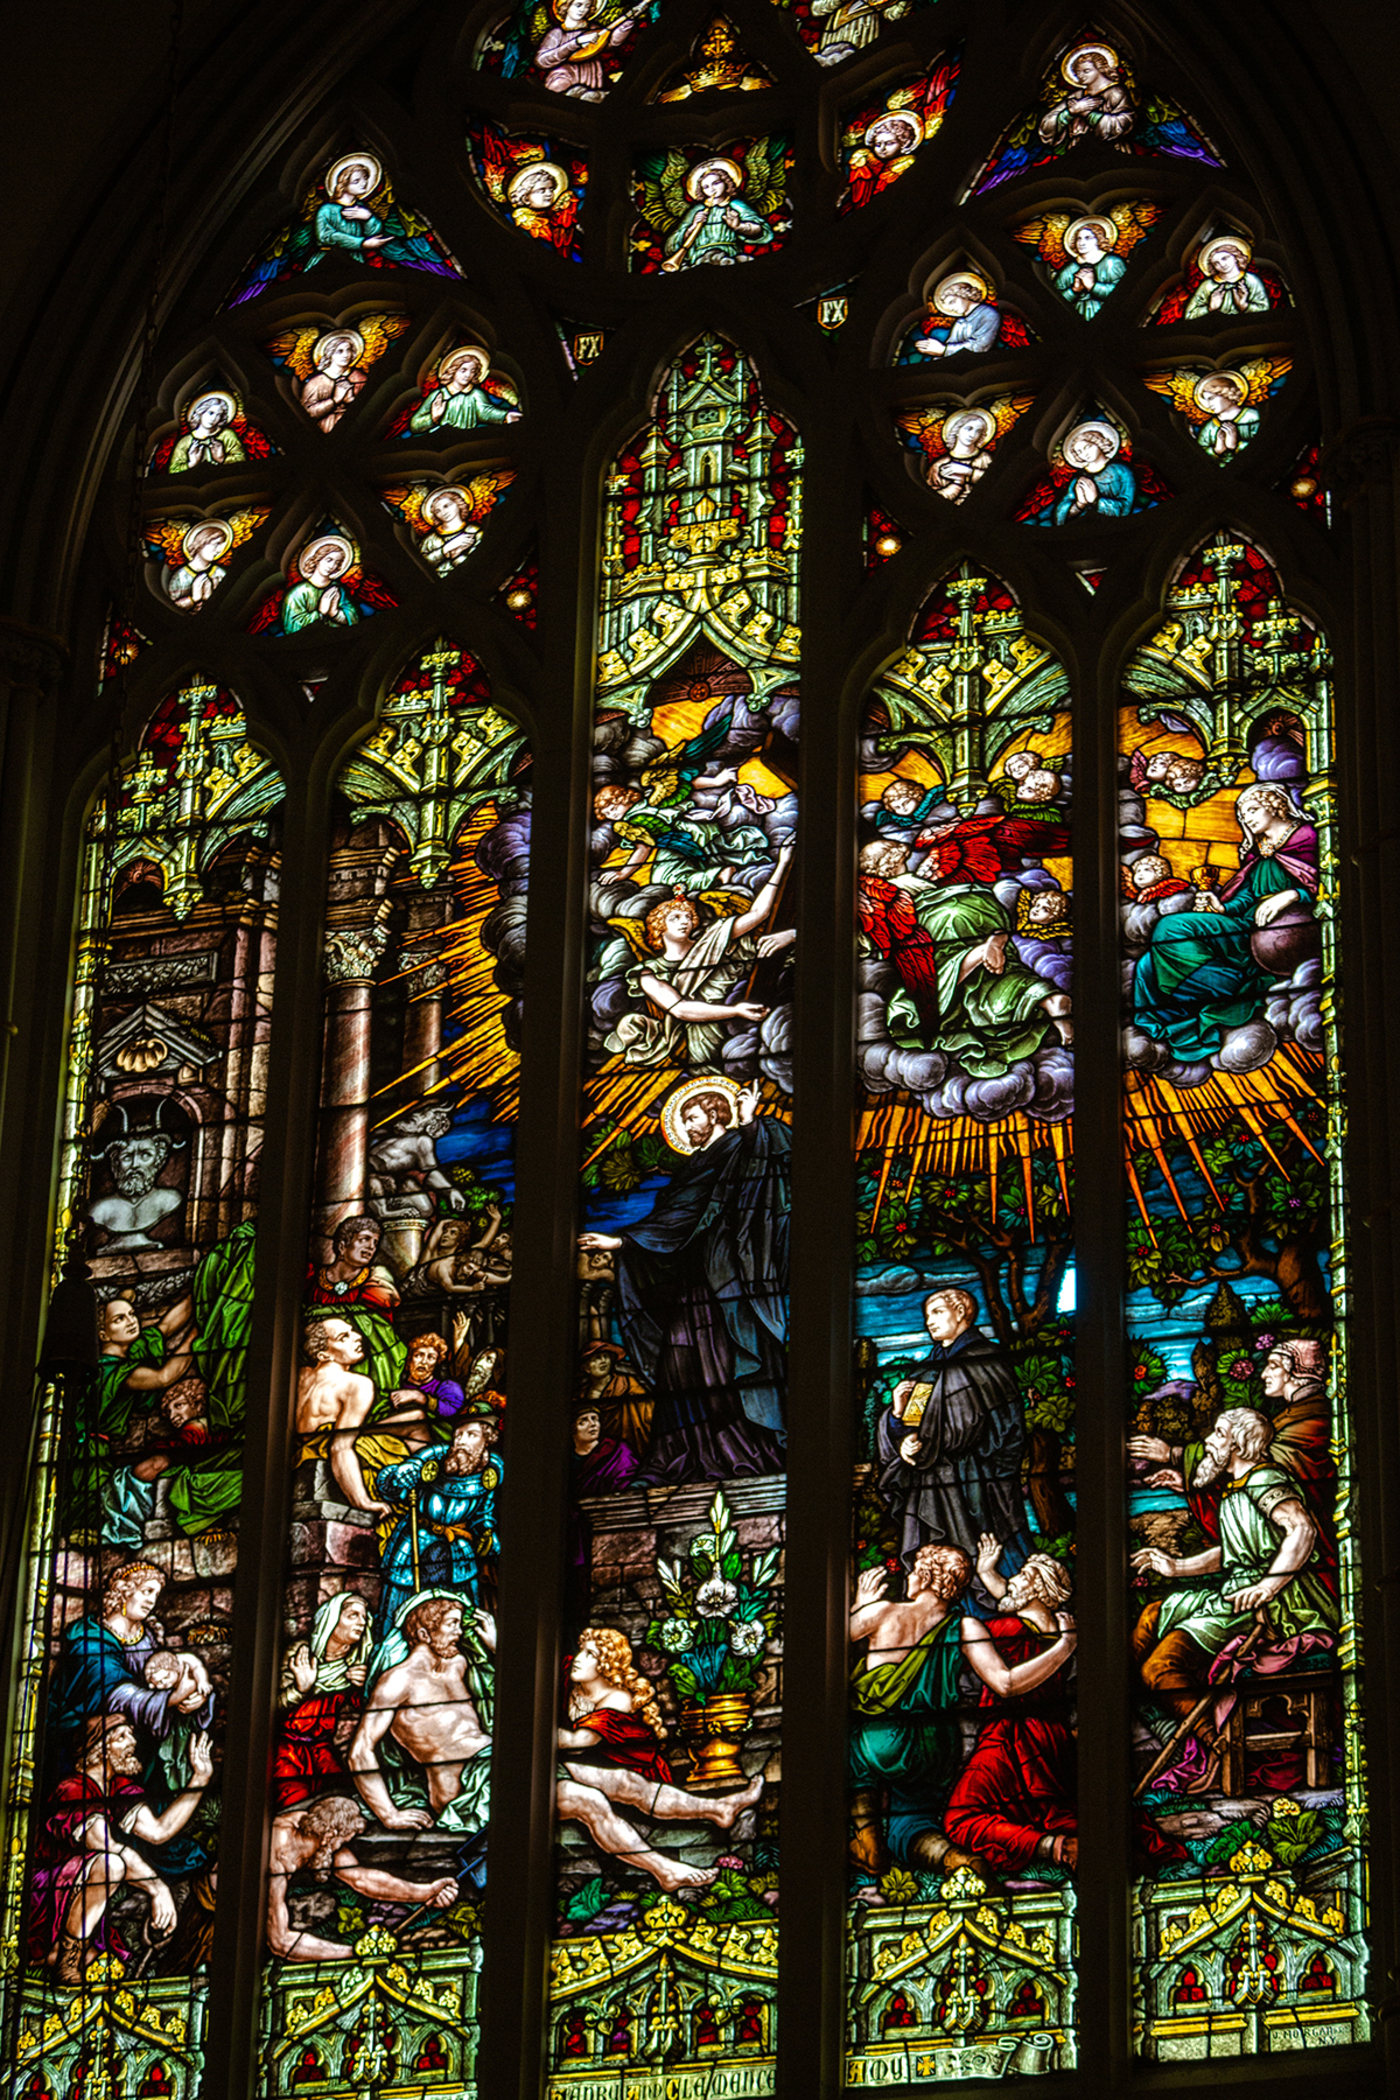 stained glass window at St. Francis Xavier church in Park Slope, Brooklyn